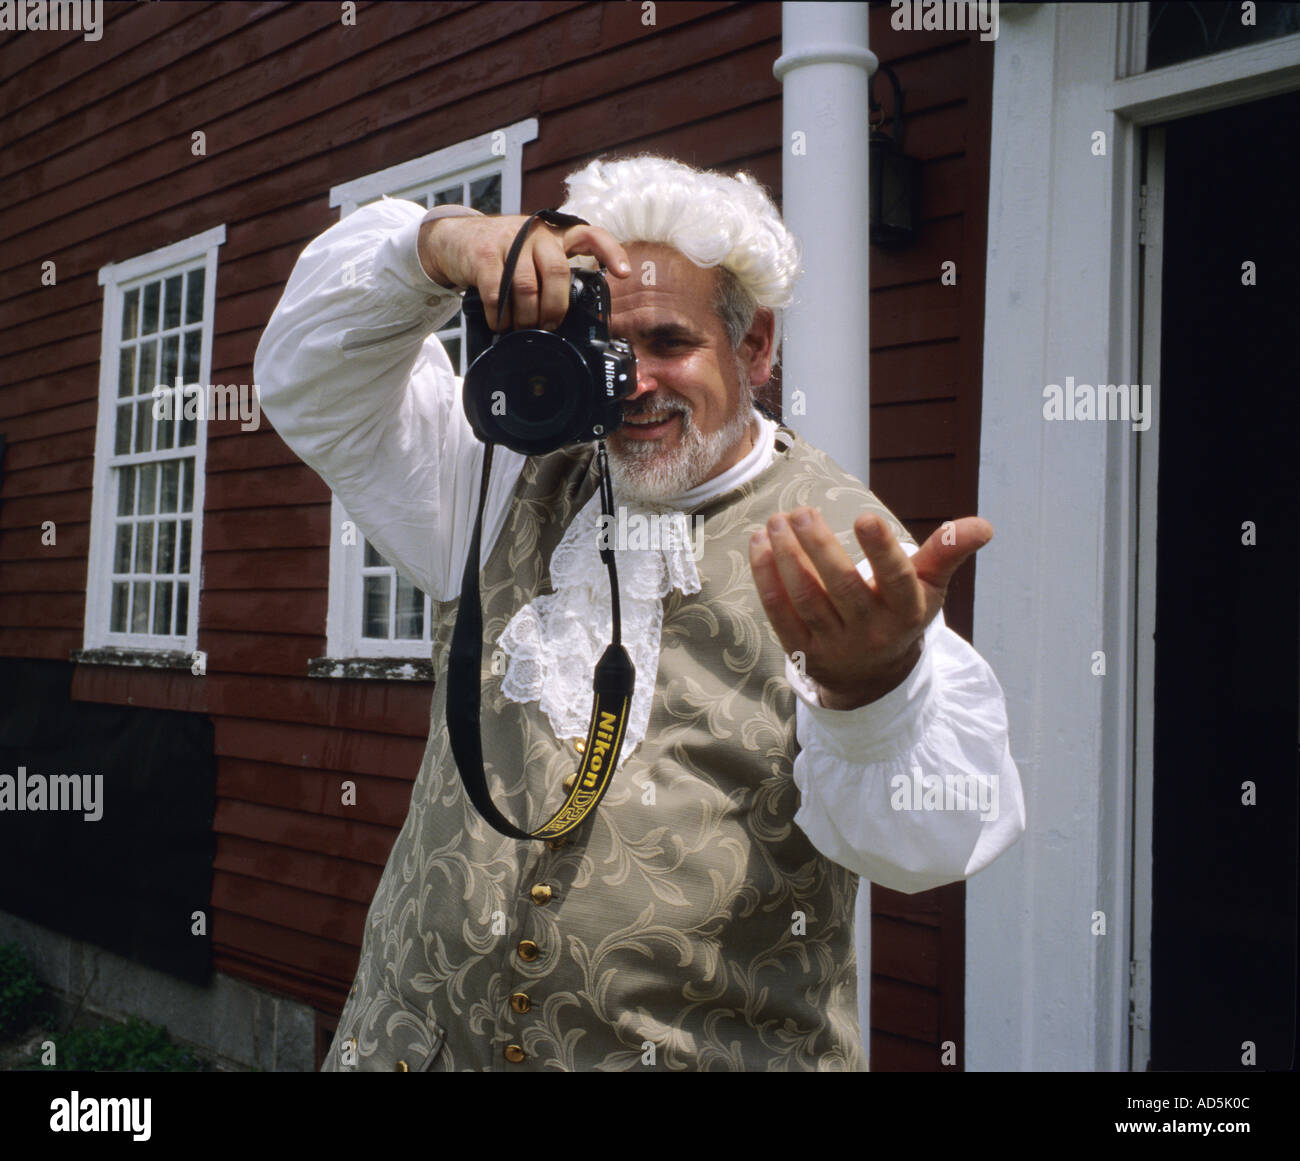 Man dressed in colonial era clothing using a modern camera Stock Photo